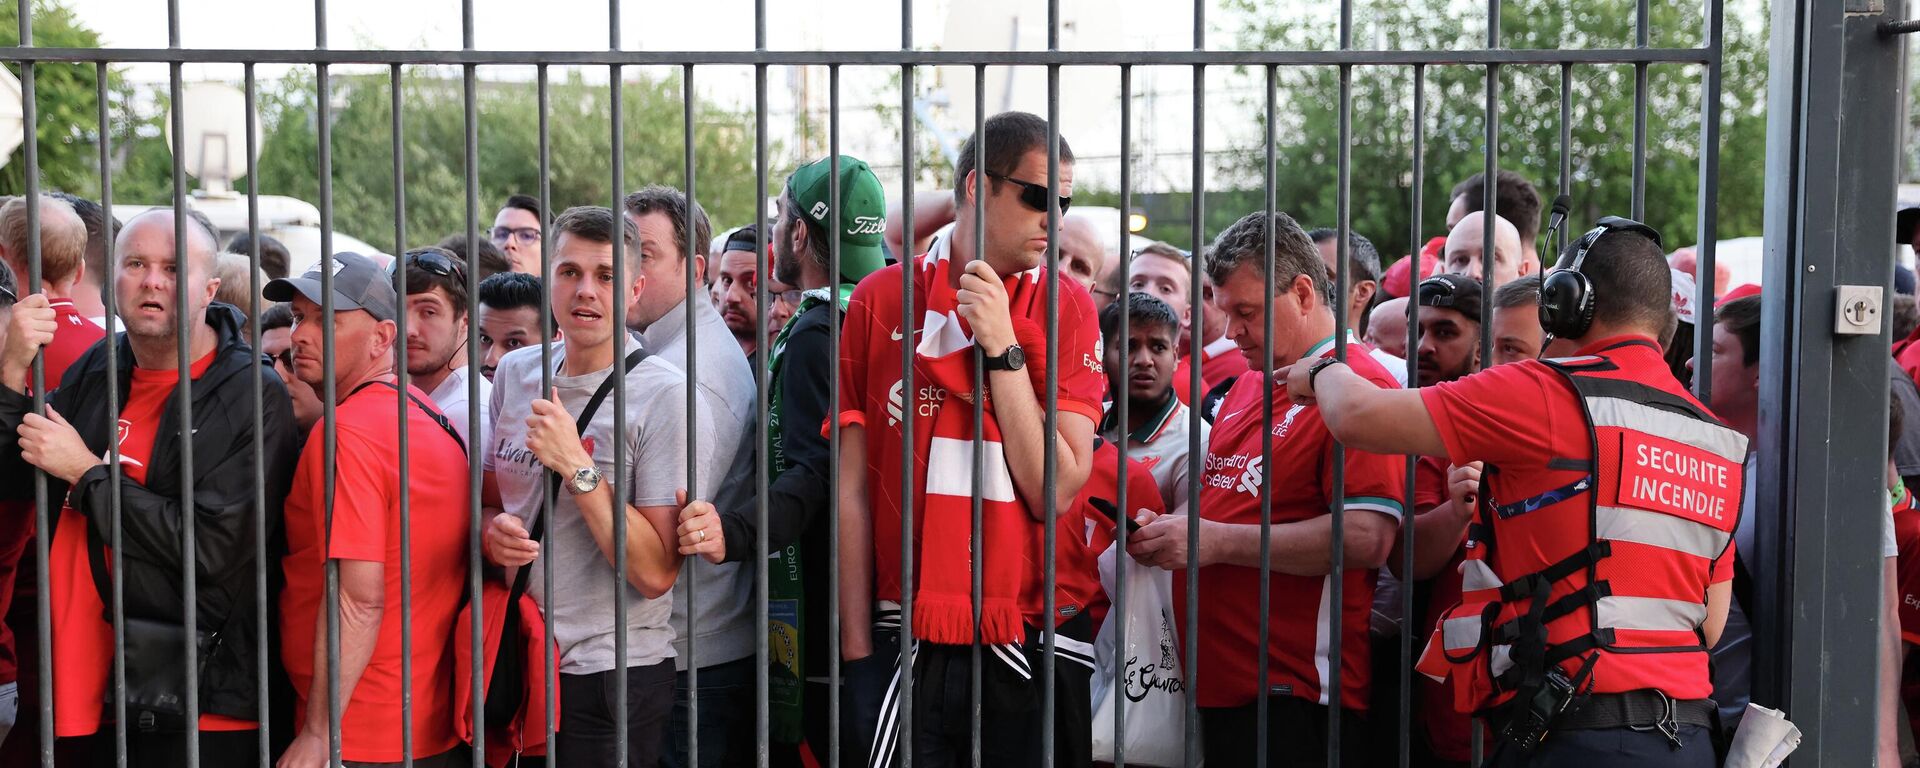 Liverpool fans stand outside unable to get in in time leading to the match being delayed prior to the UEFA Champions League final football match between Liverpool and Real Madrid at the Stade de France in Saint-Denis, north of Paris, on May 28, 2022 - Sputnik International, 1920, 28.05.2022